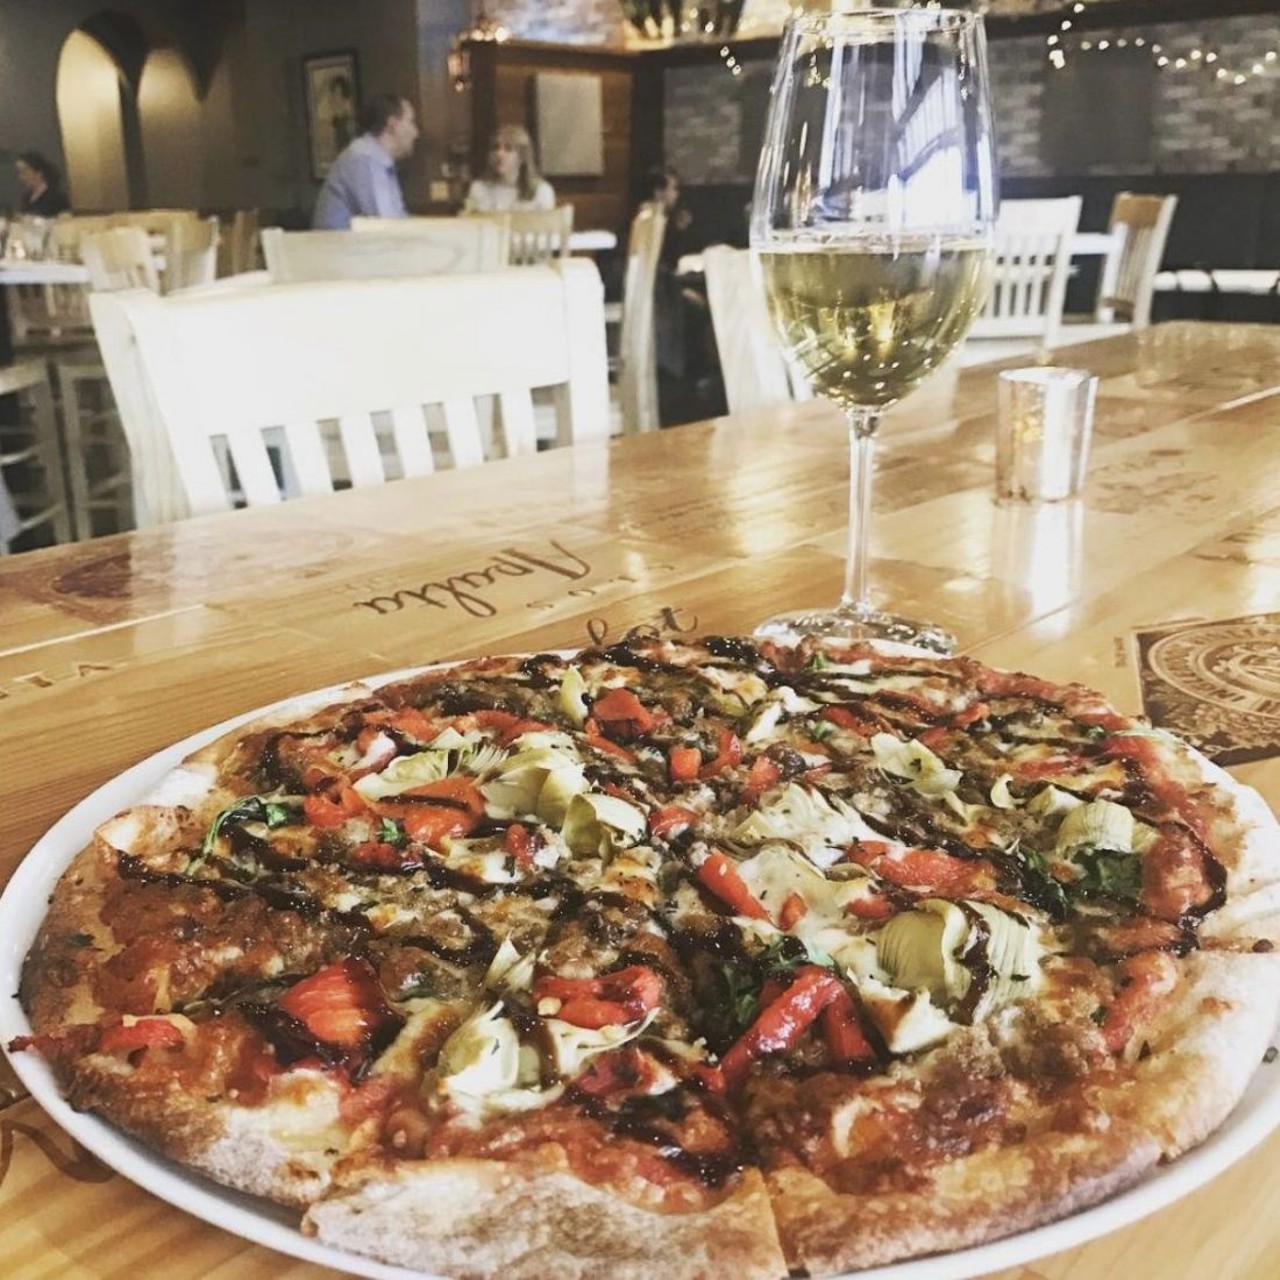  Humble Wine Bar
15400 Detroit Ave., Lakewood
This place really has everything you look for in a wine bar. They have a delicious, eclectic selection of wine, great small plates, and a wonderful cheese selection. The delicious Neapolitan style pizzas are what really makes this place stand out. 
Photo via @HumbleWineBar/Instagram